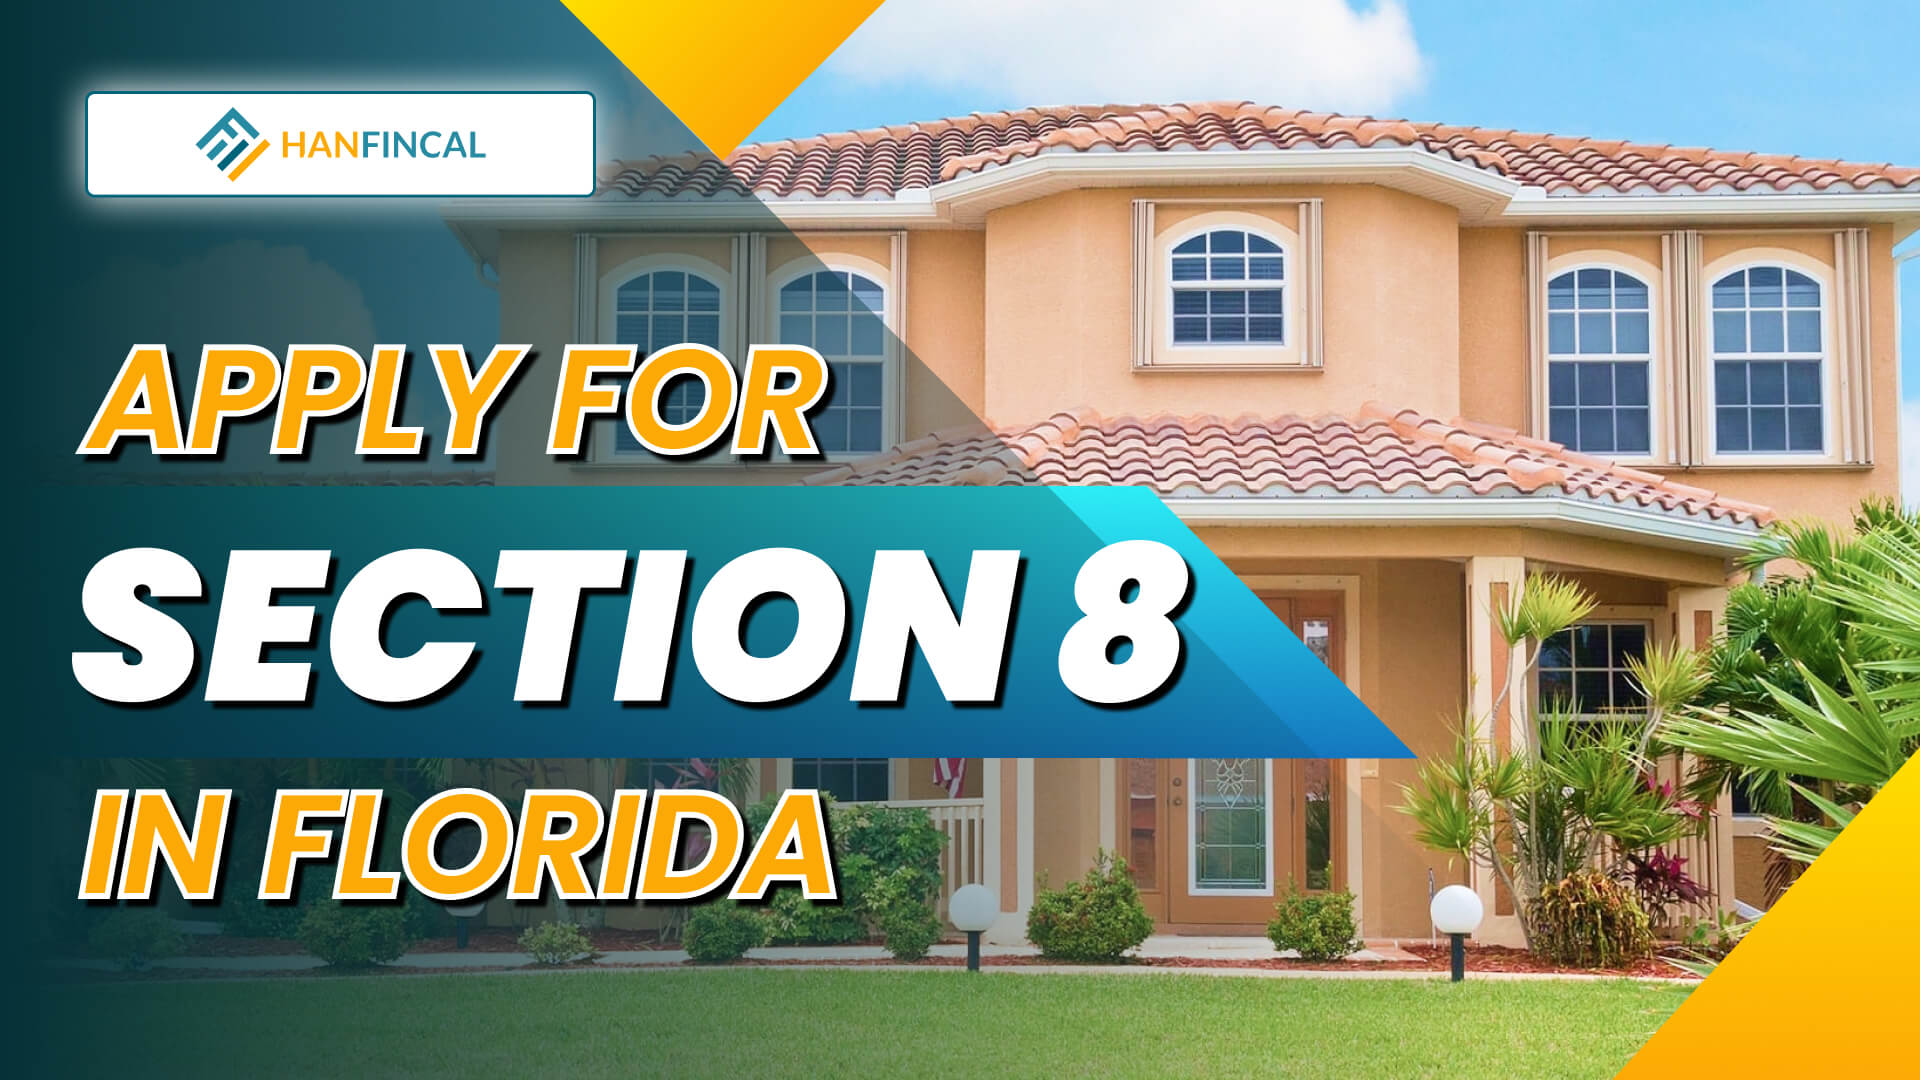 How To Qualify & Apply for Section 8 In Florida? Hanfincal